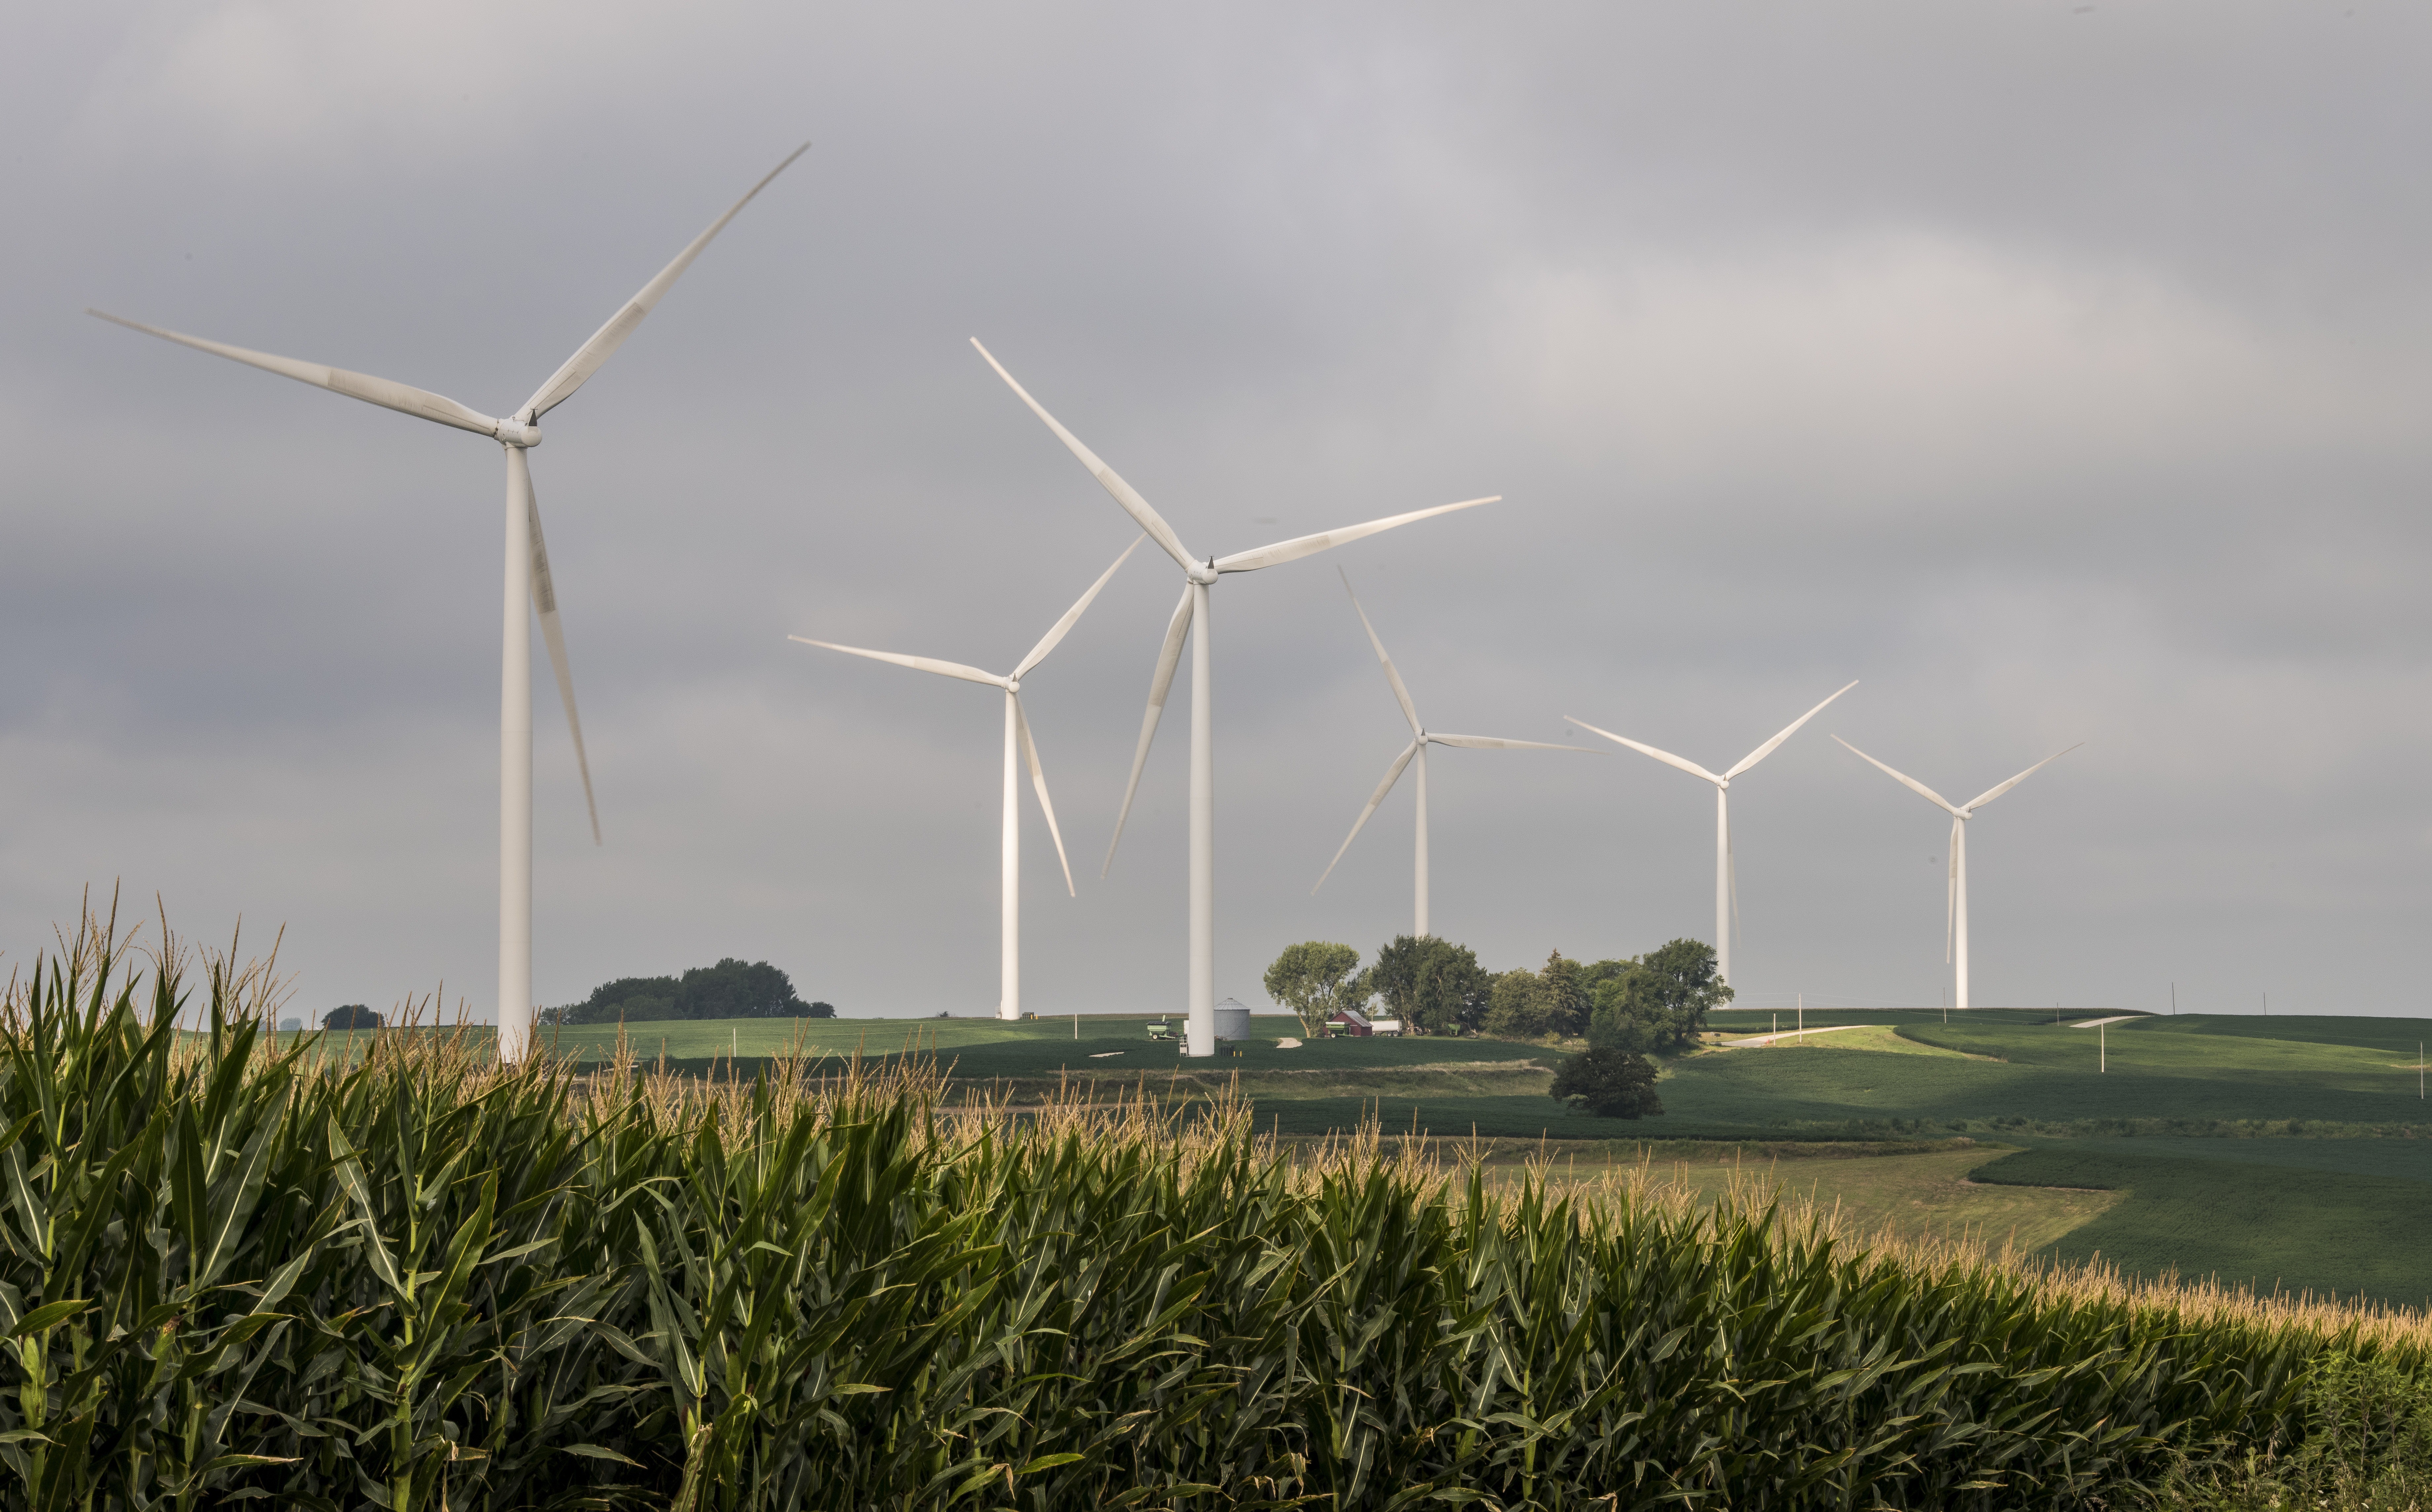 A group of wind turbines in a cornfield.